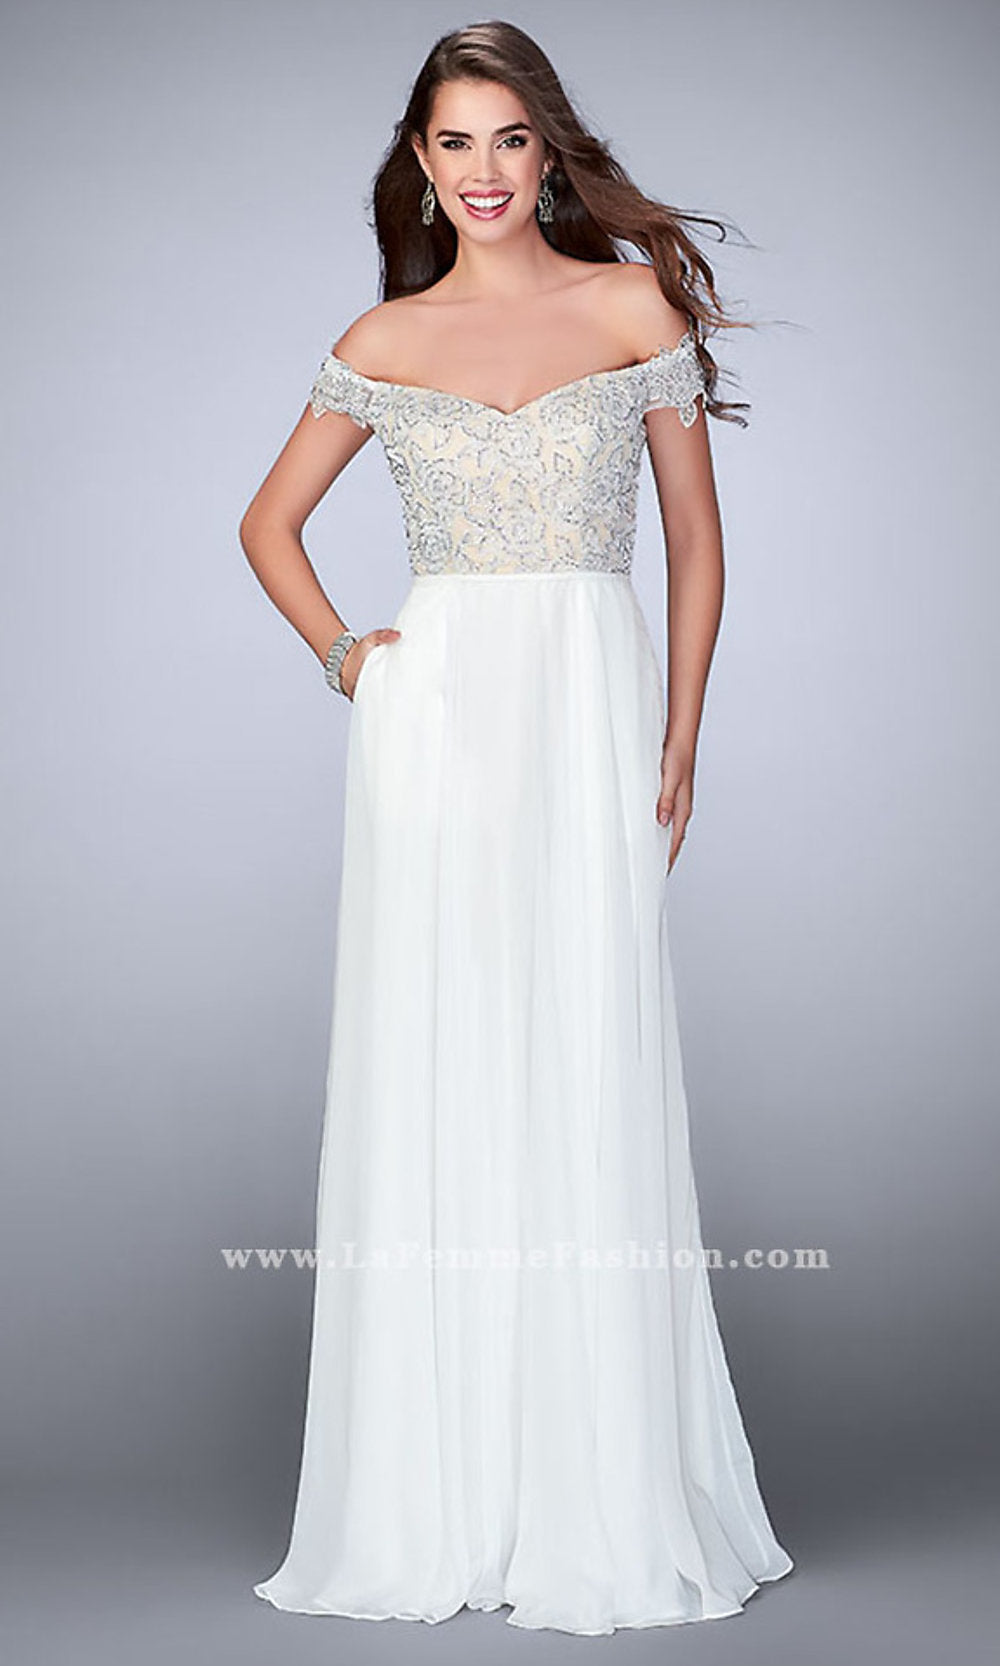 Ivory Lace Off-the-Shoulder Long Prom Dress